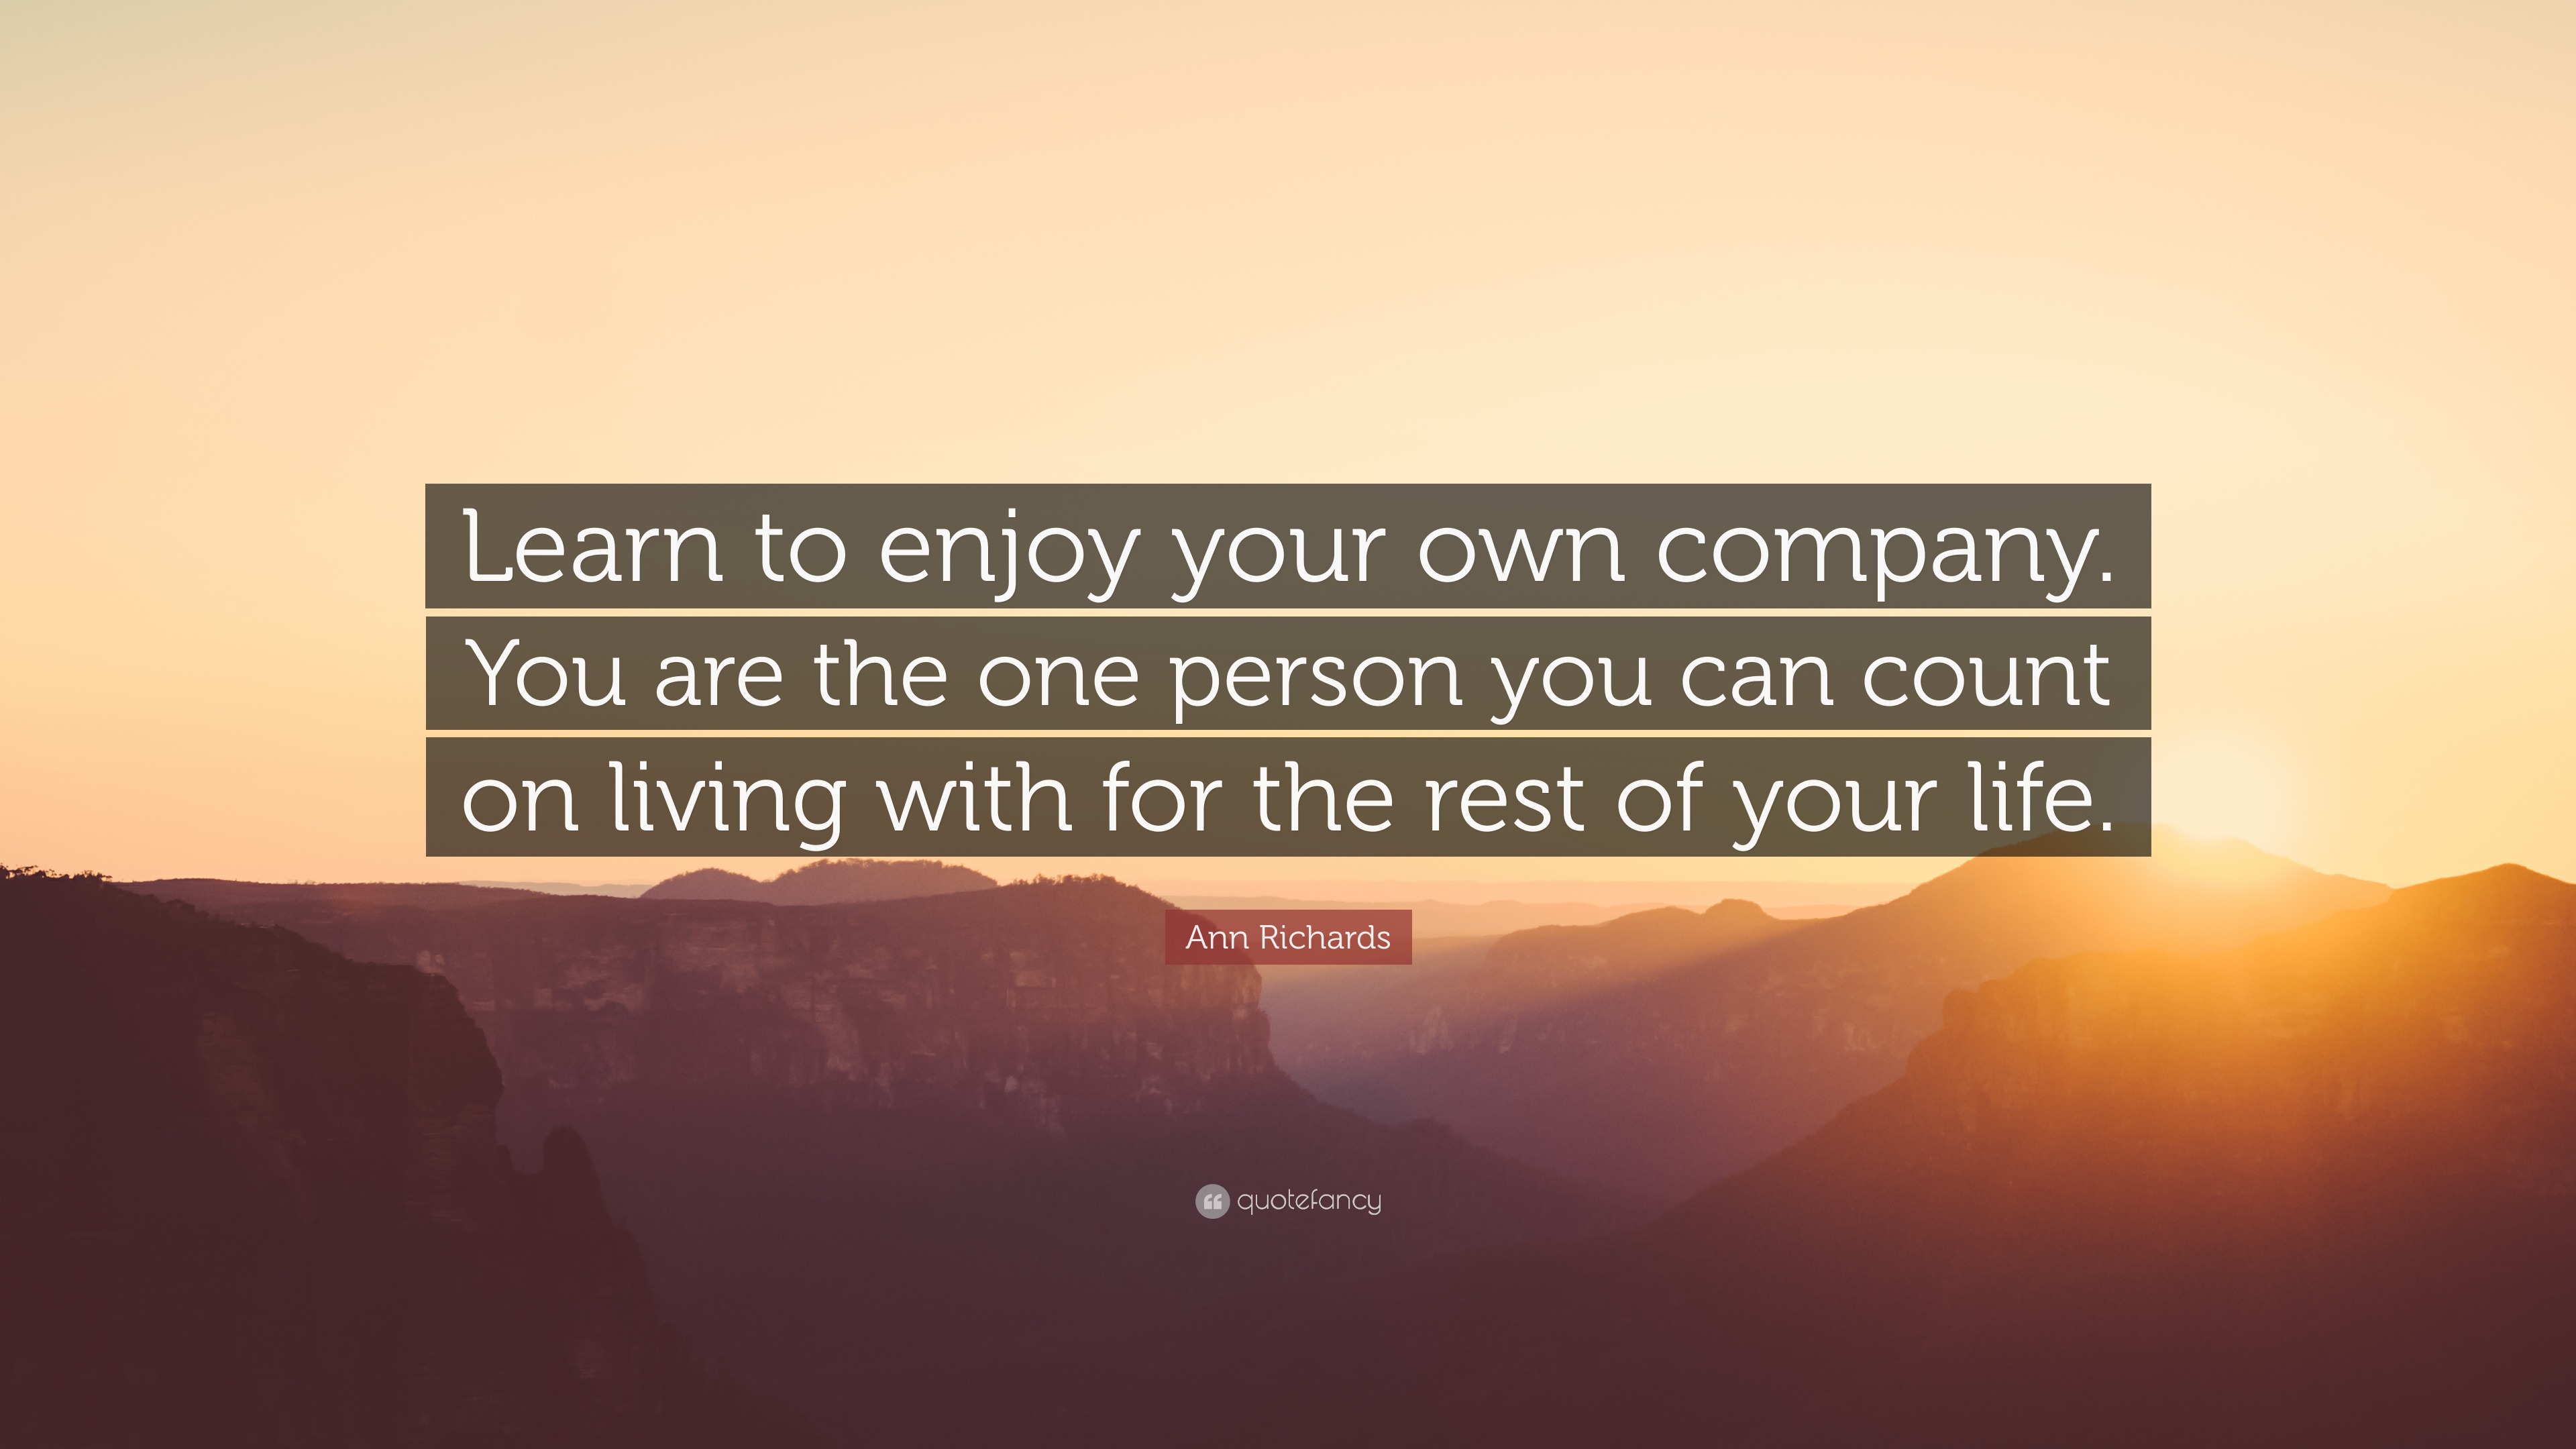 Ways To Enjoy Your Own Company